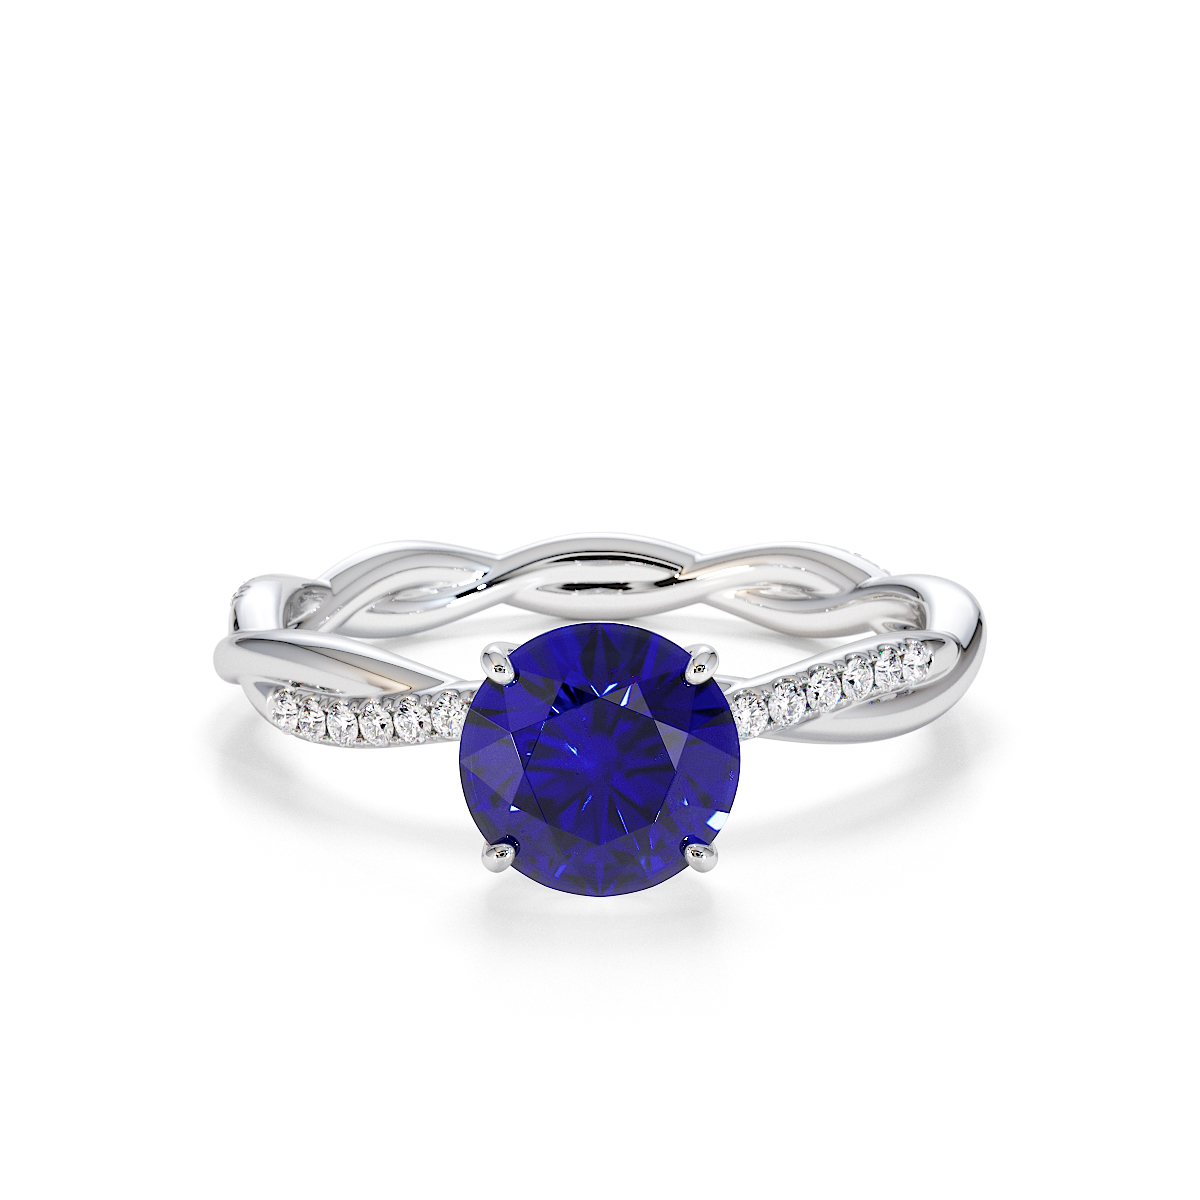 Blue Sapphire Engagement Rings | Blue Sapphire Rings from AG & Sons